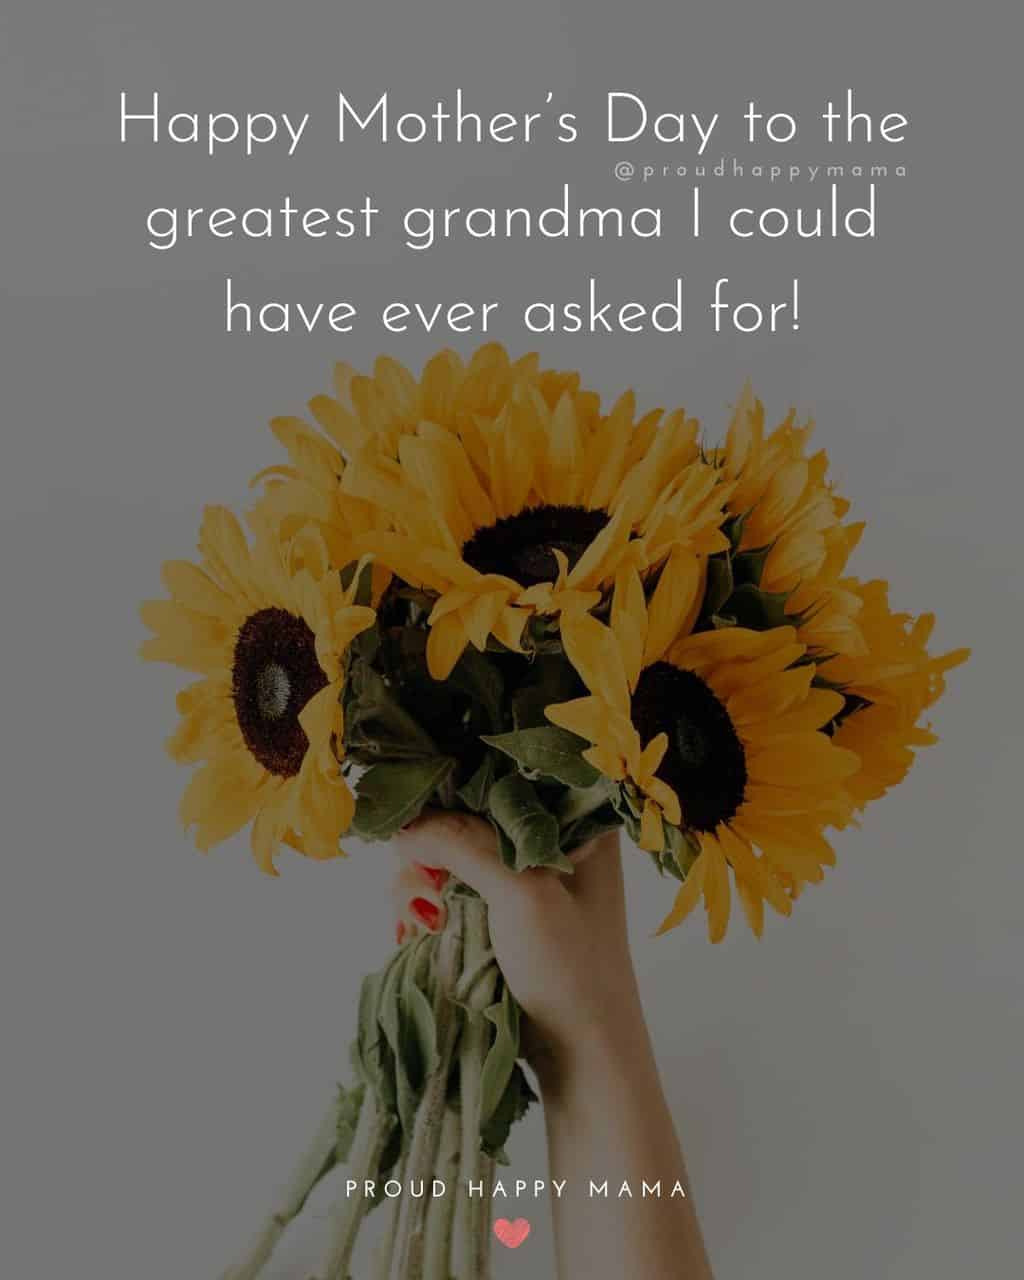 Happy Mothers Day Quotes To Grandma - Happy Mother’s Day to the greatest grandma I could have ever asked for!’